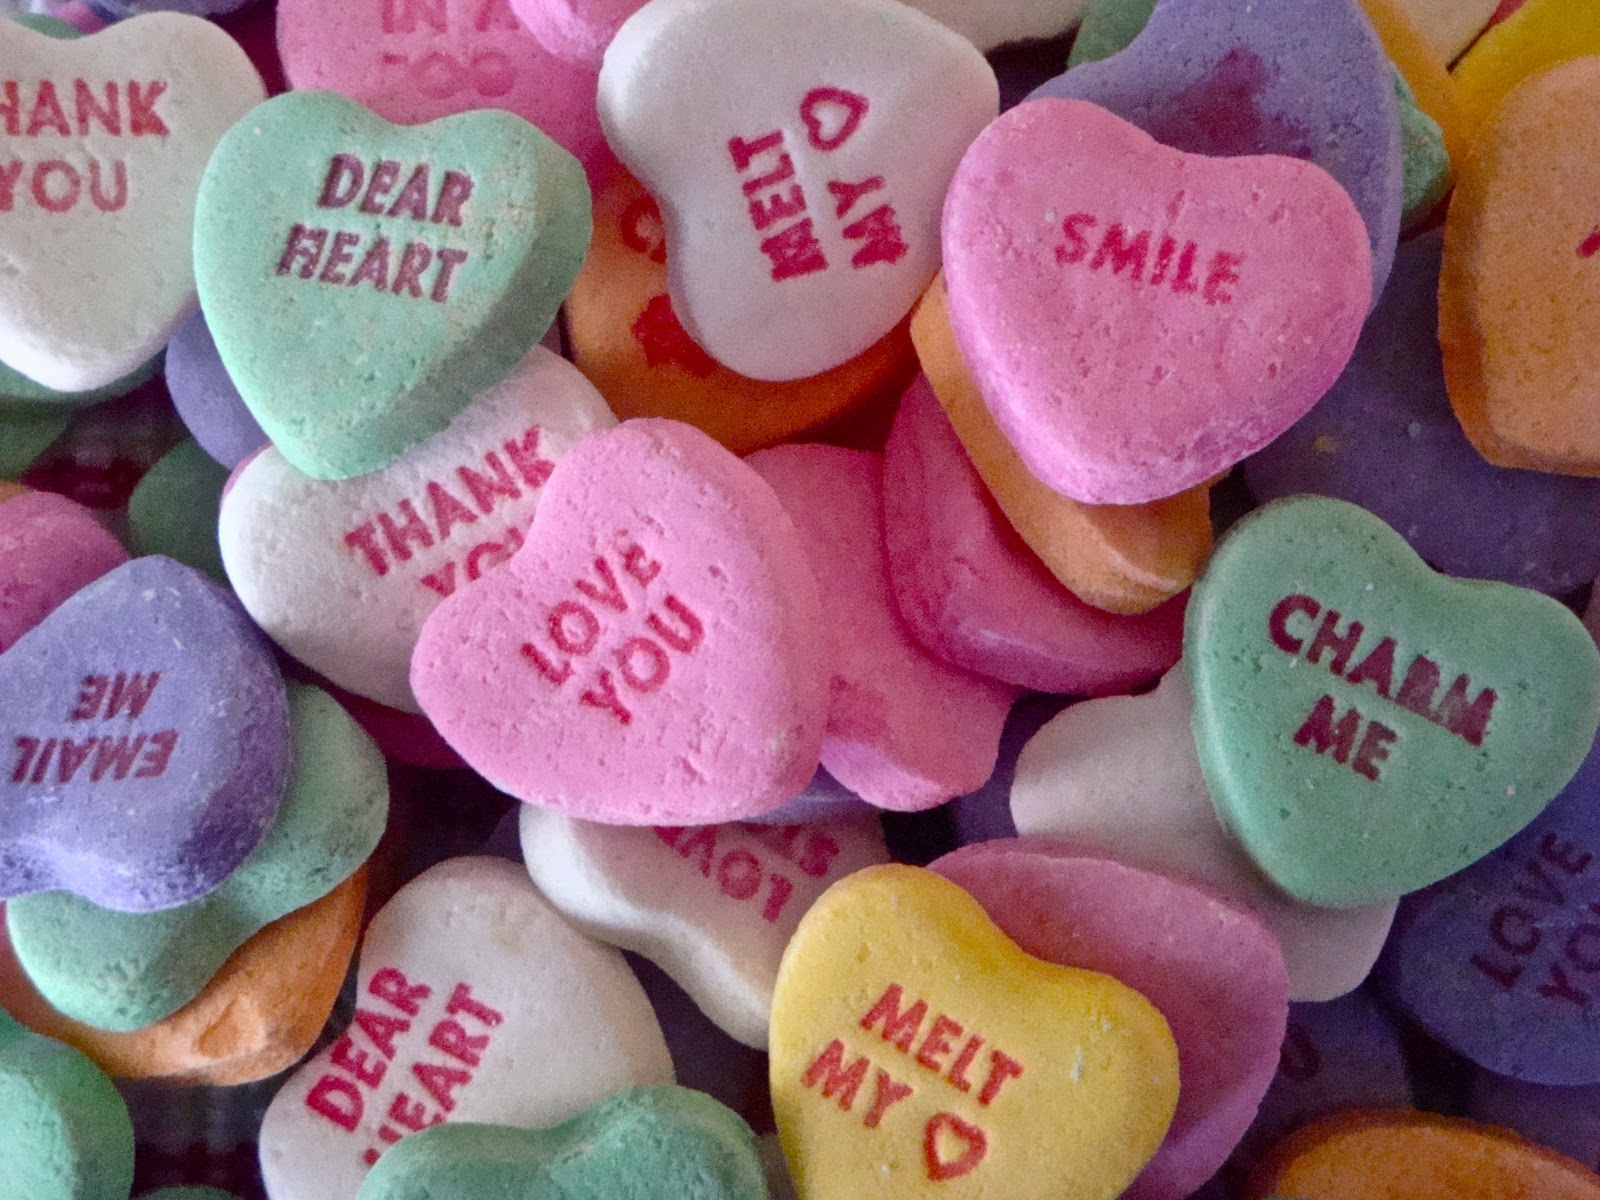 Valentine’s Day 2019 No Sweethearts candy conversation hearts Vox